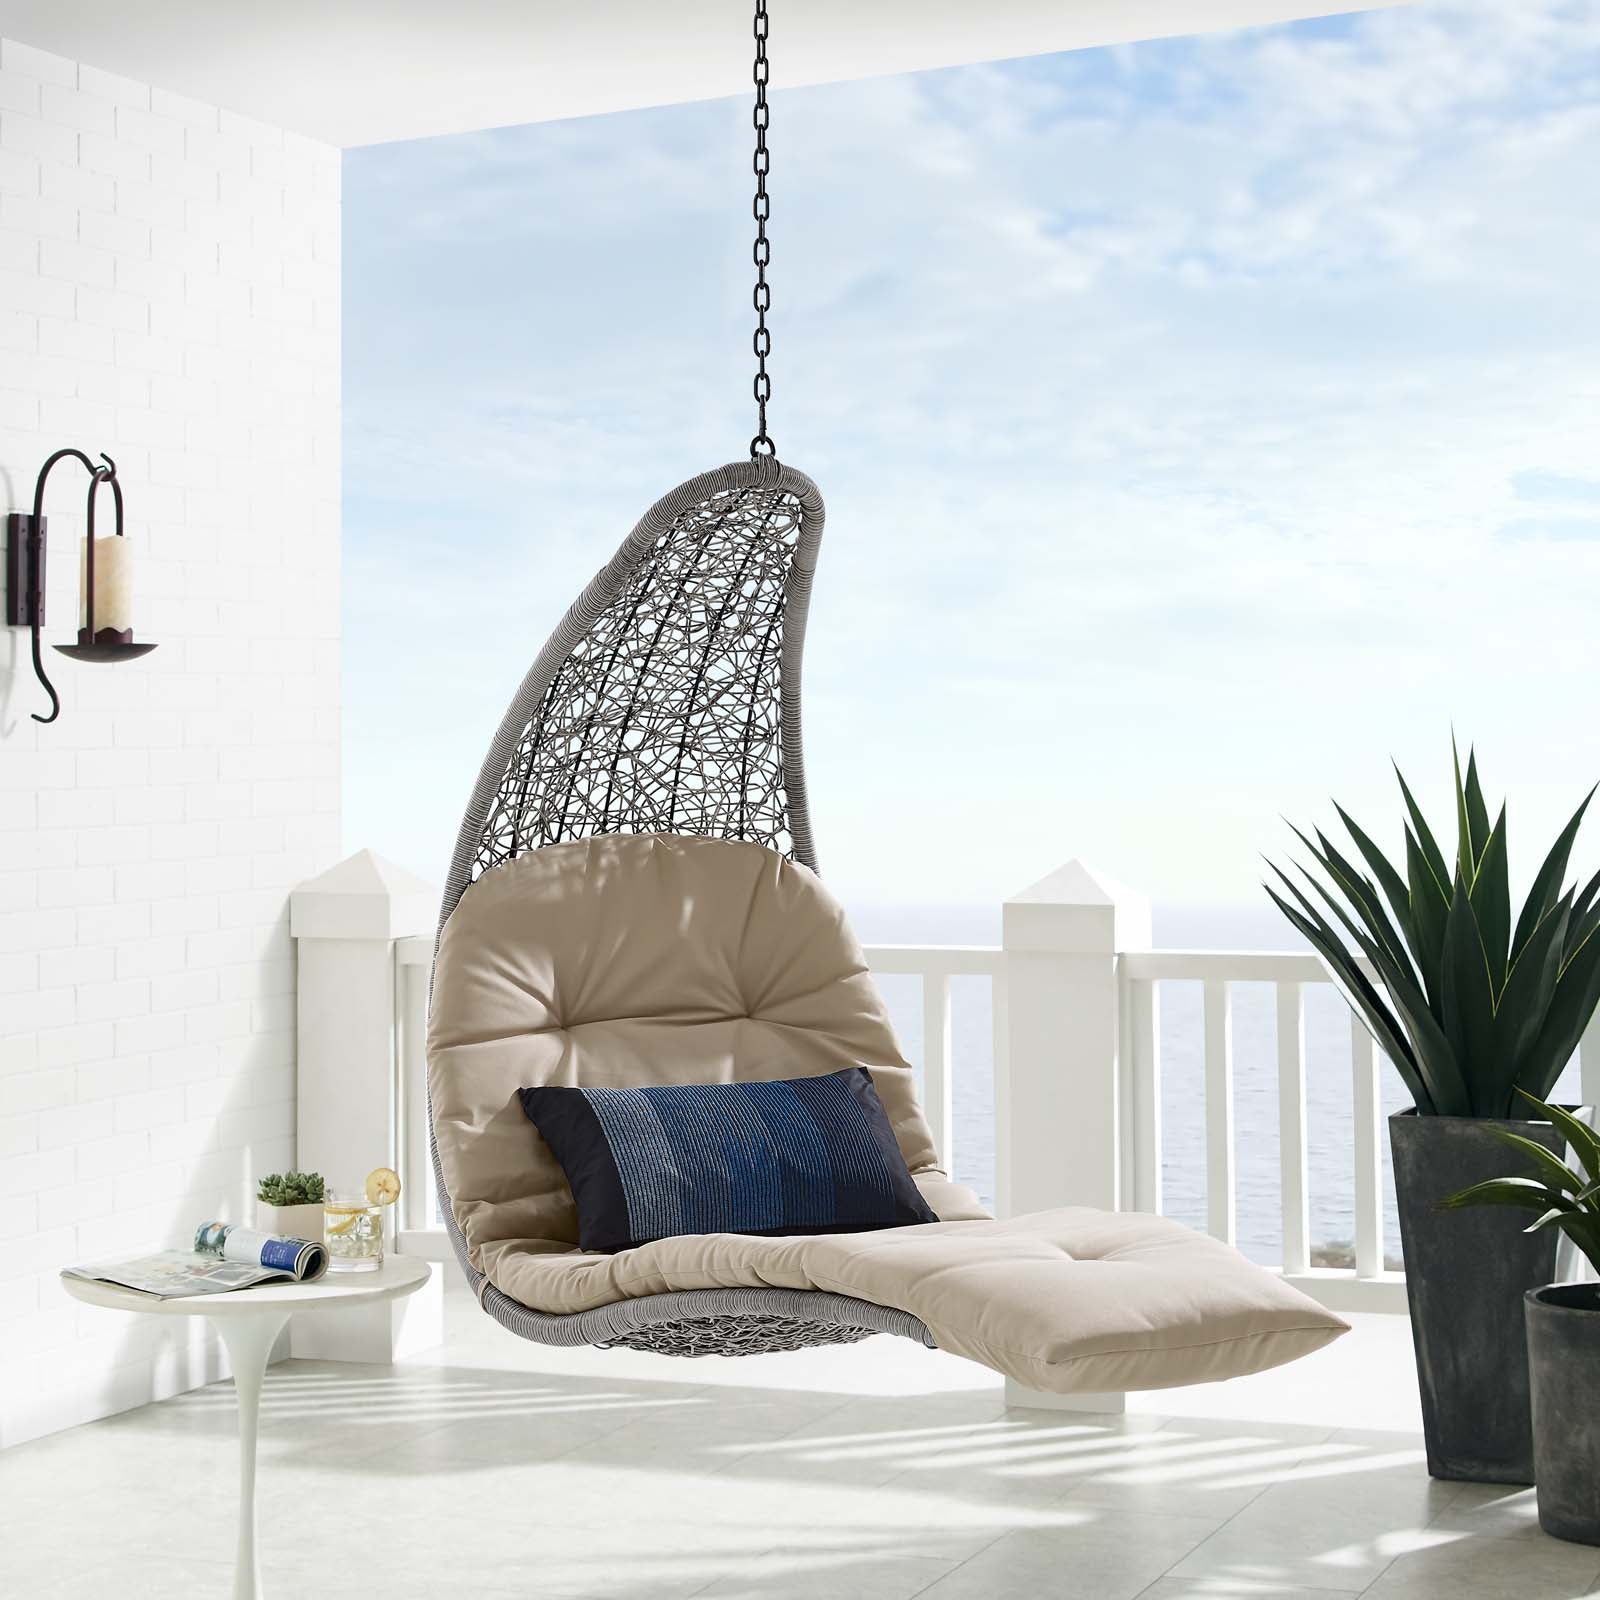 Landscape Outdoor Patio Hanging Chaise Lounge Outdoor Patio Swing Chair - East Shore Modern Home Furnishings